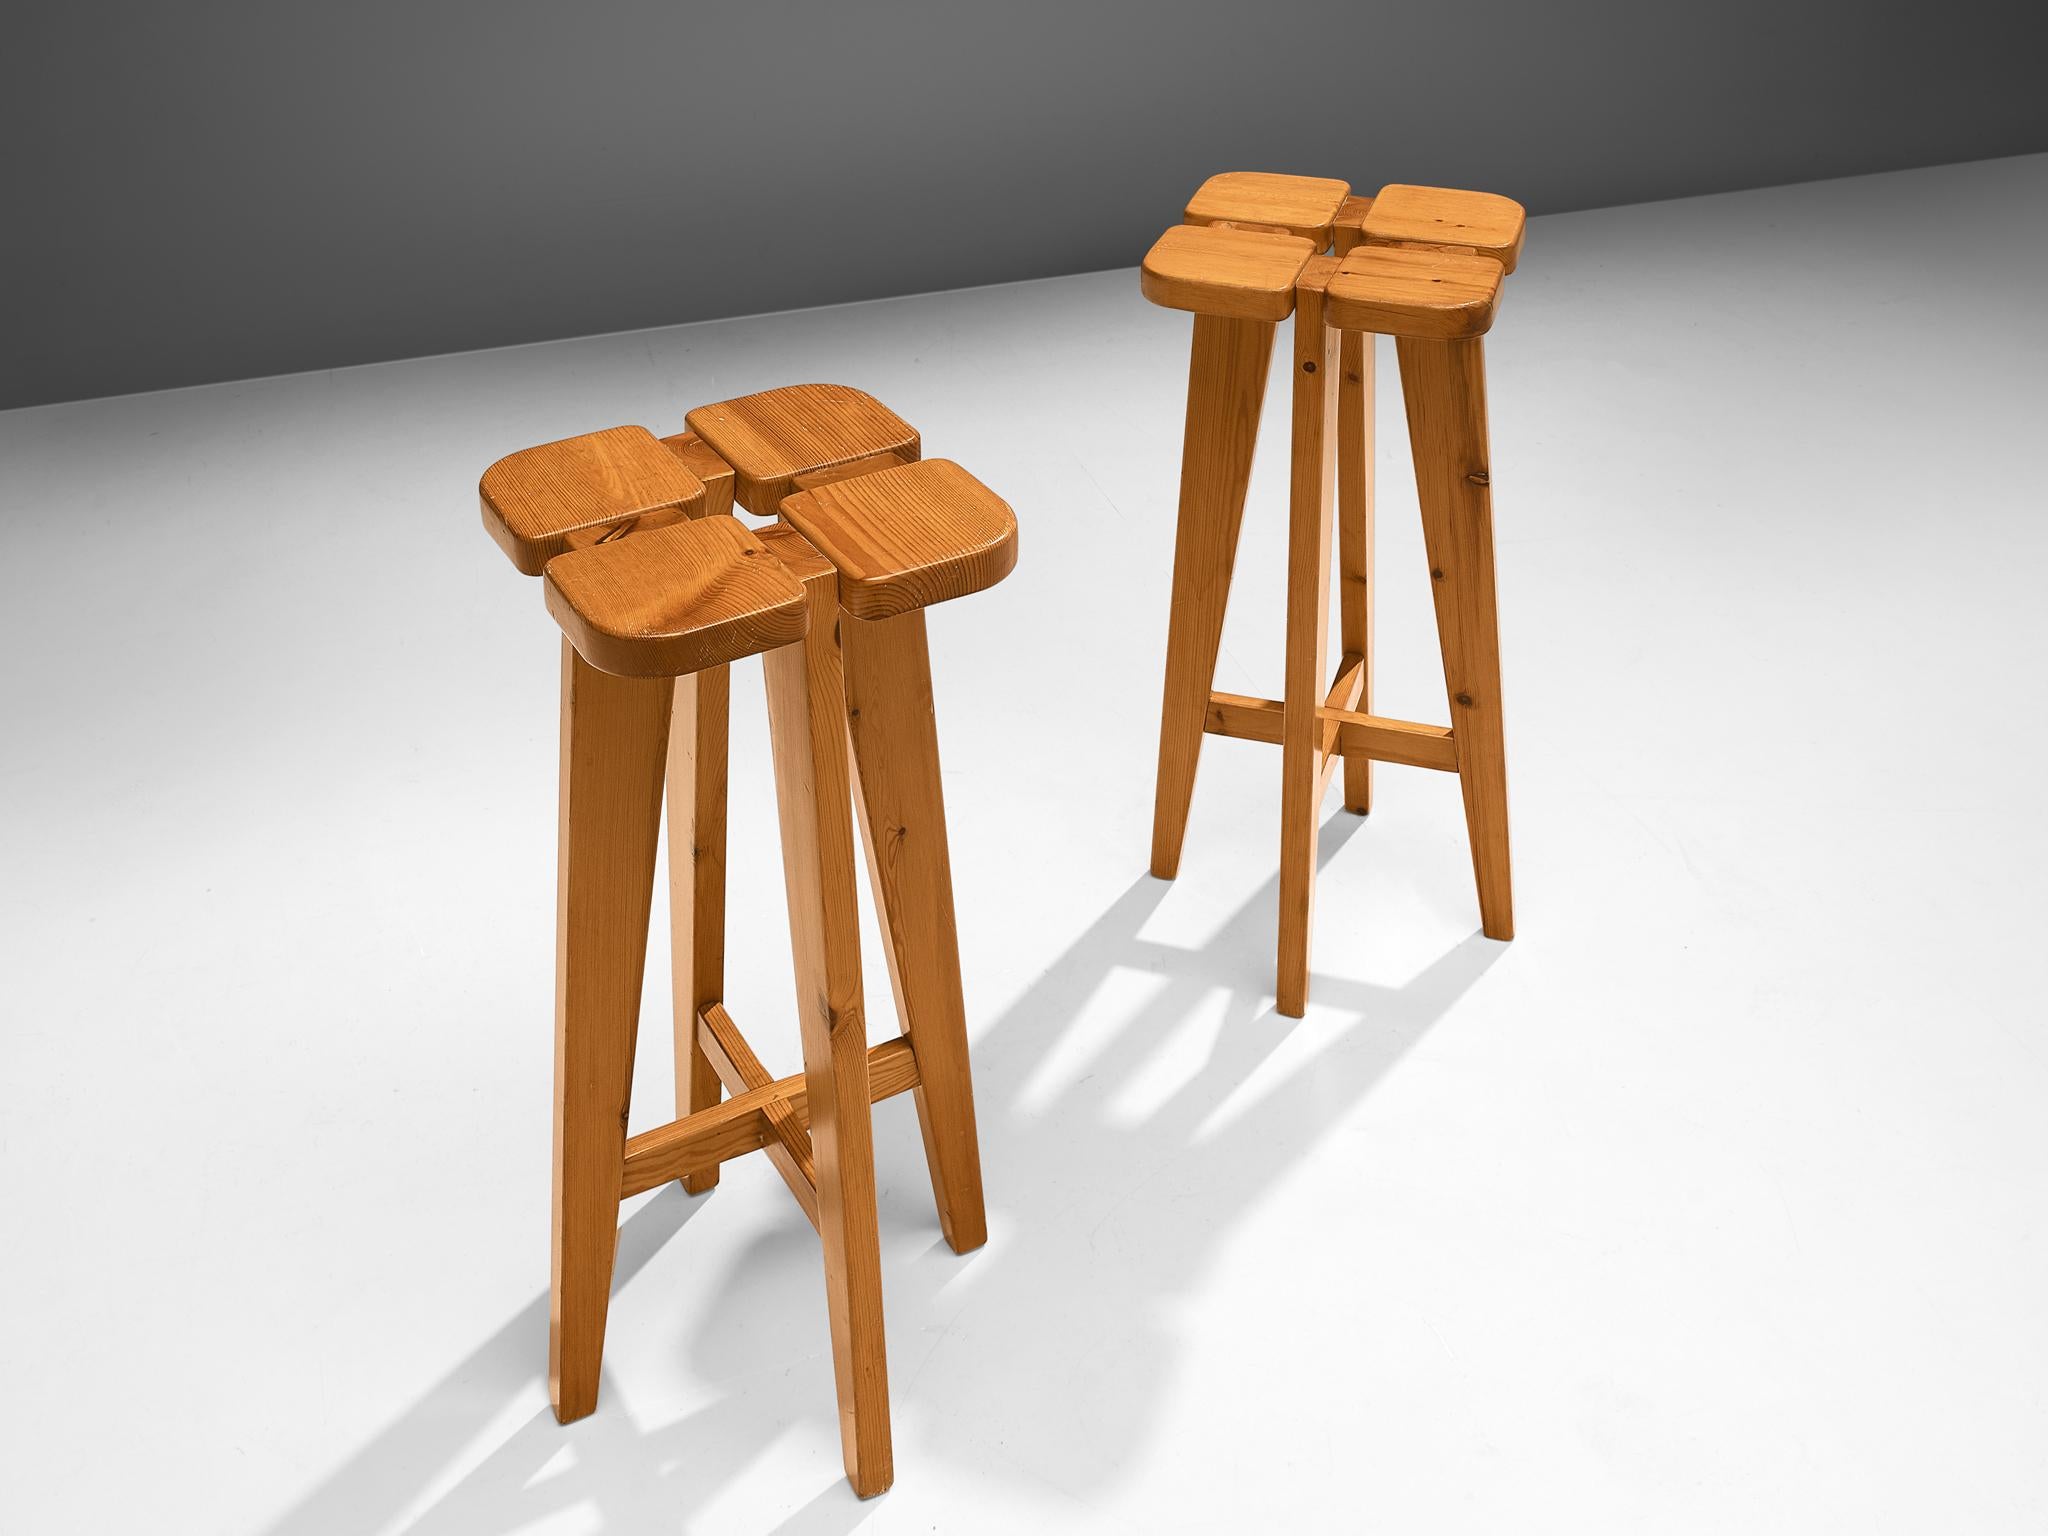 Lisa Johansson Pape for Stockmann AB, pair of barstools, solid pine, Finland, 1960s.

PAir of Scandinavian Modern barstools designed by Lisa Johansson Pape. The design is simplistic: A clover top with four sloping legs. The construction of the